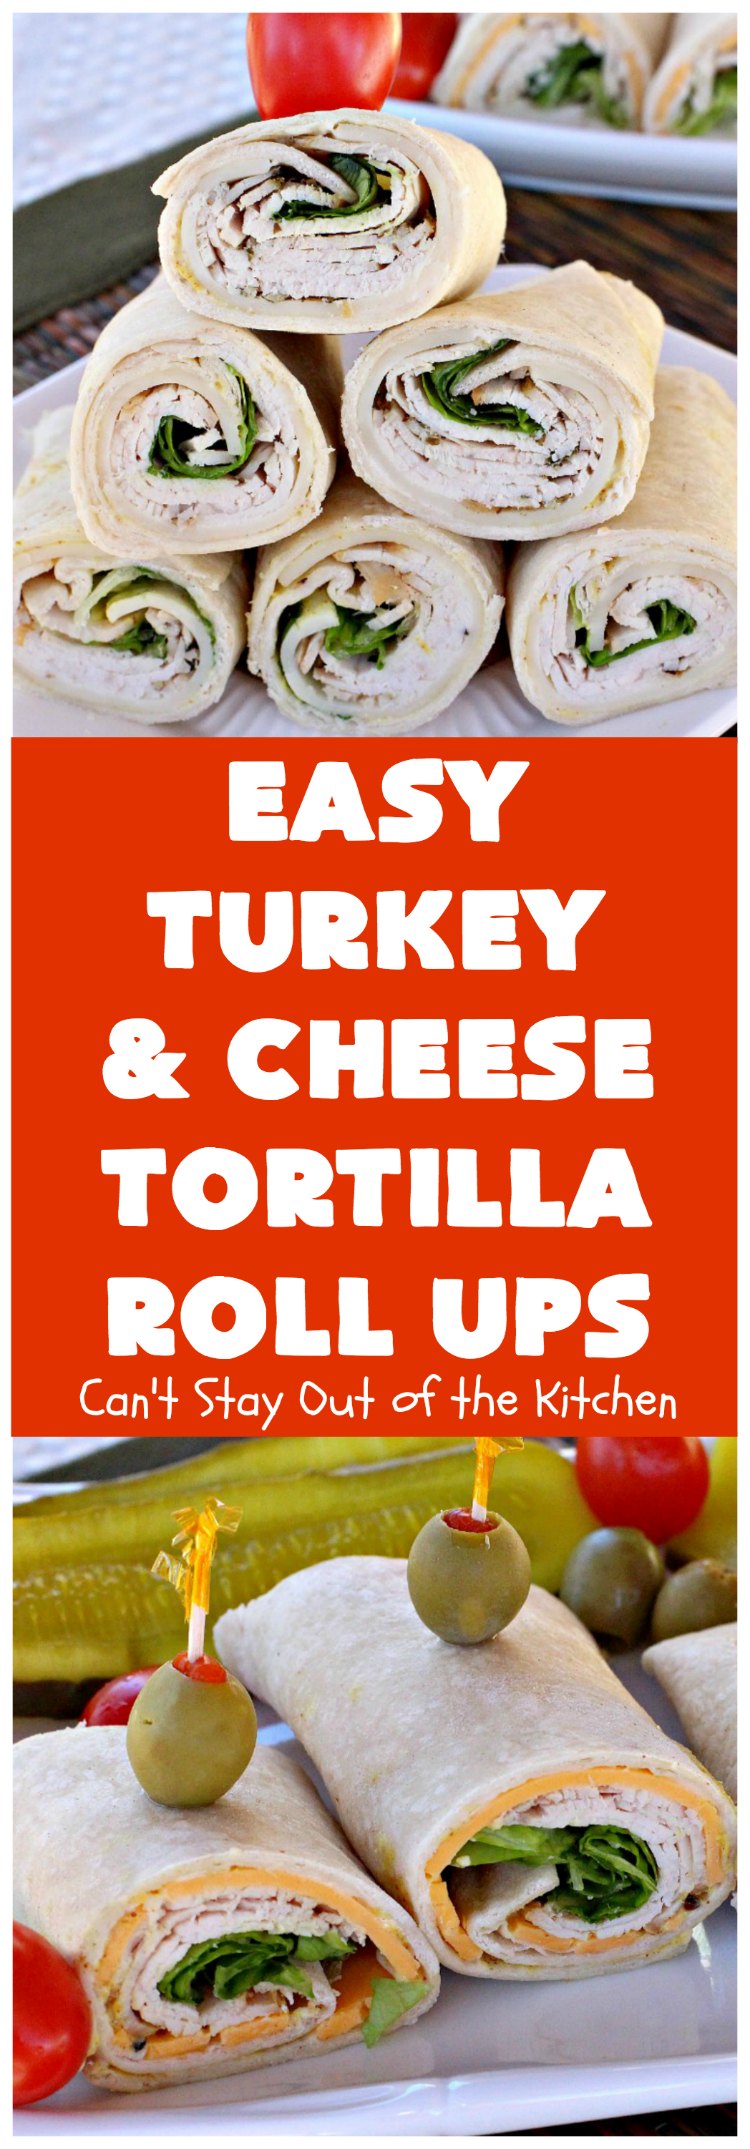 Easy Turkey and Cheese Tortilla Roll Ups | Can't Stay Out of the KitchenEasy Turkey and Cheese Tortilla Roll Ups | Can't Stay Out of the Kitchen